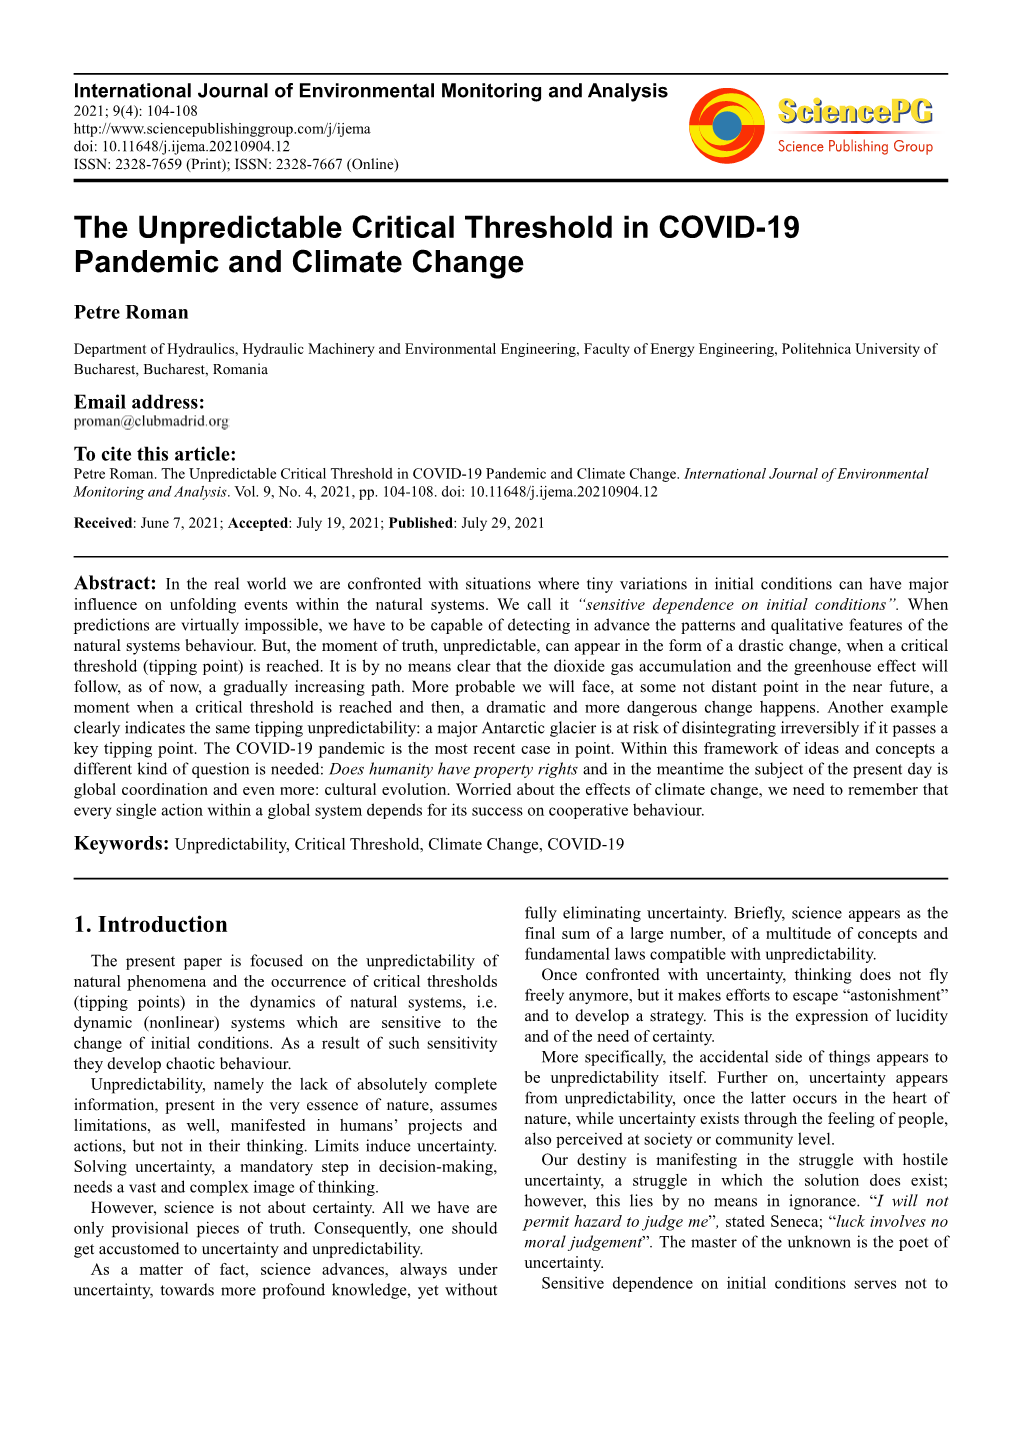 The Unpredictable Critical Threshold in COVID-19 Pandemic and Climate Change